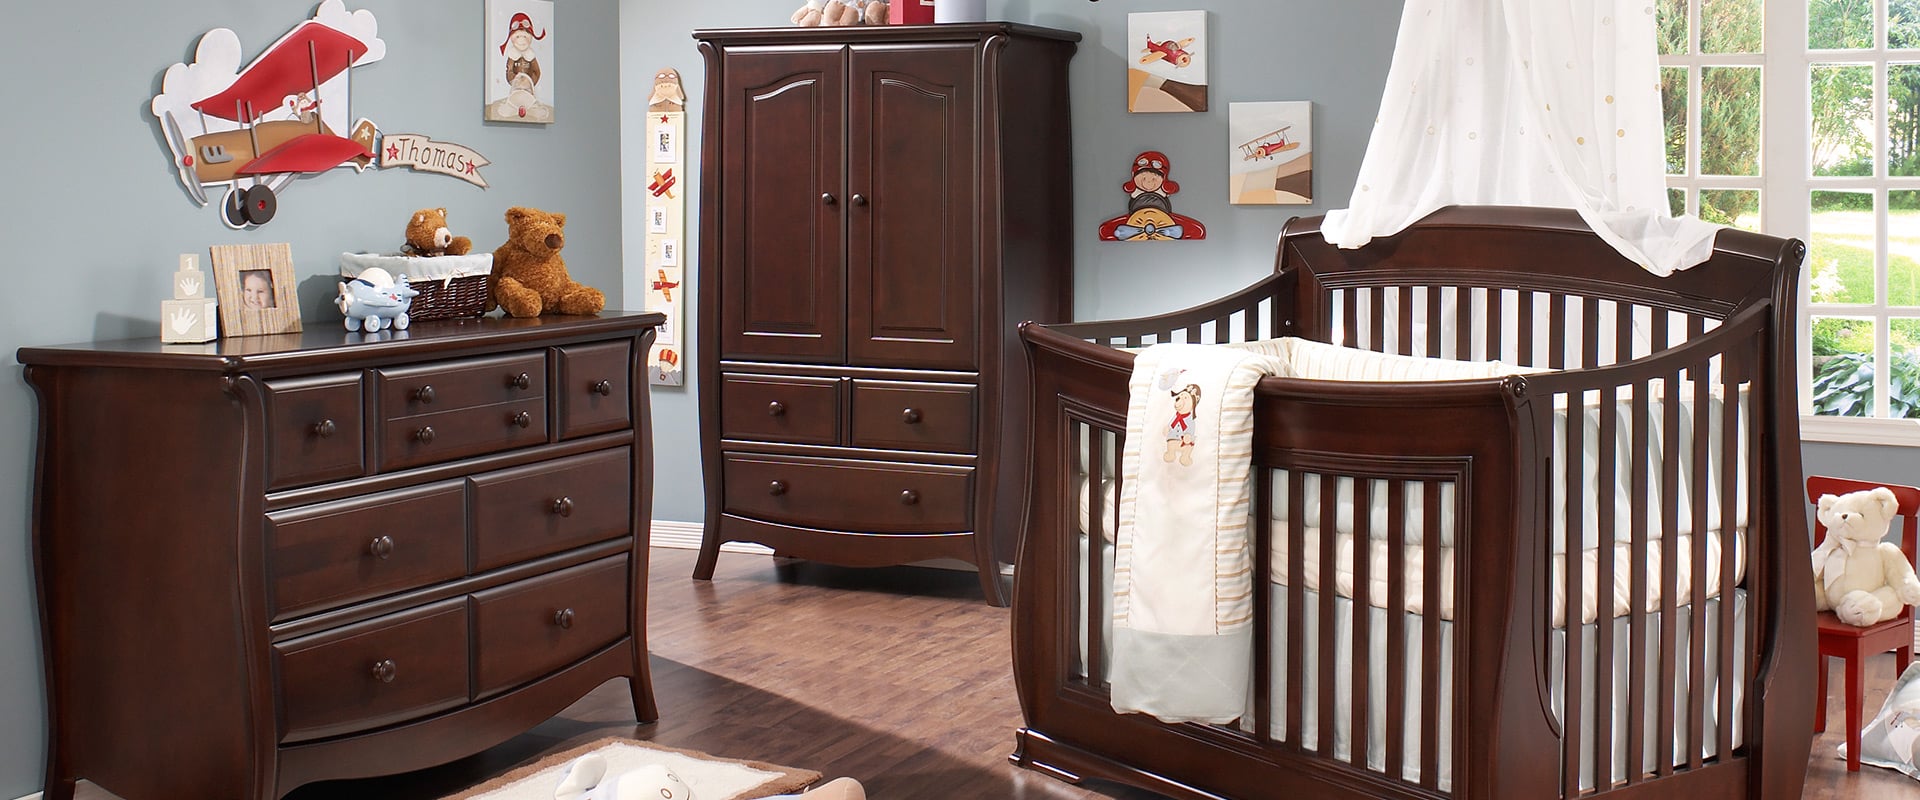 Collection Bella Furniture Baby Room In Cocoa Natart Juvenile